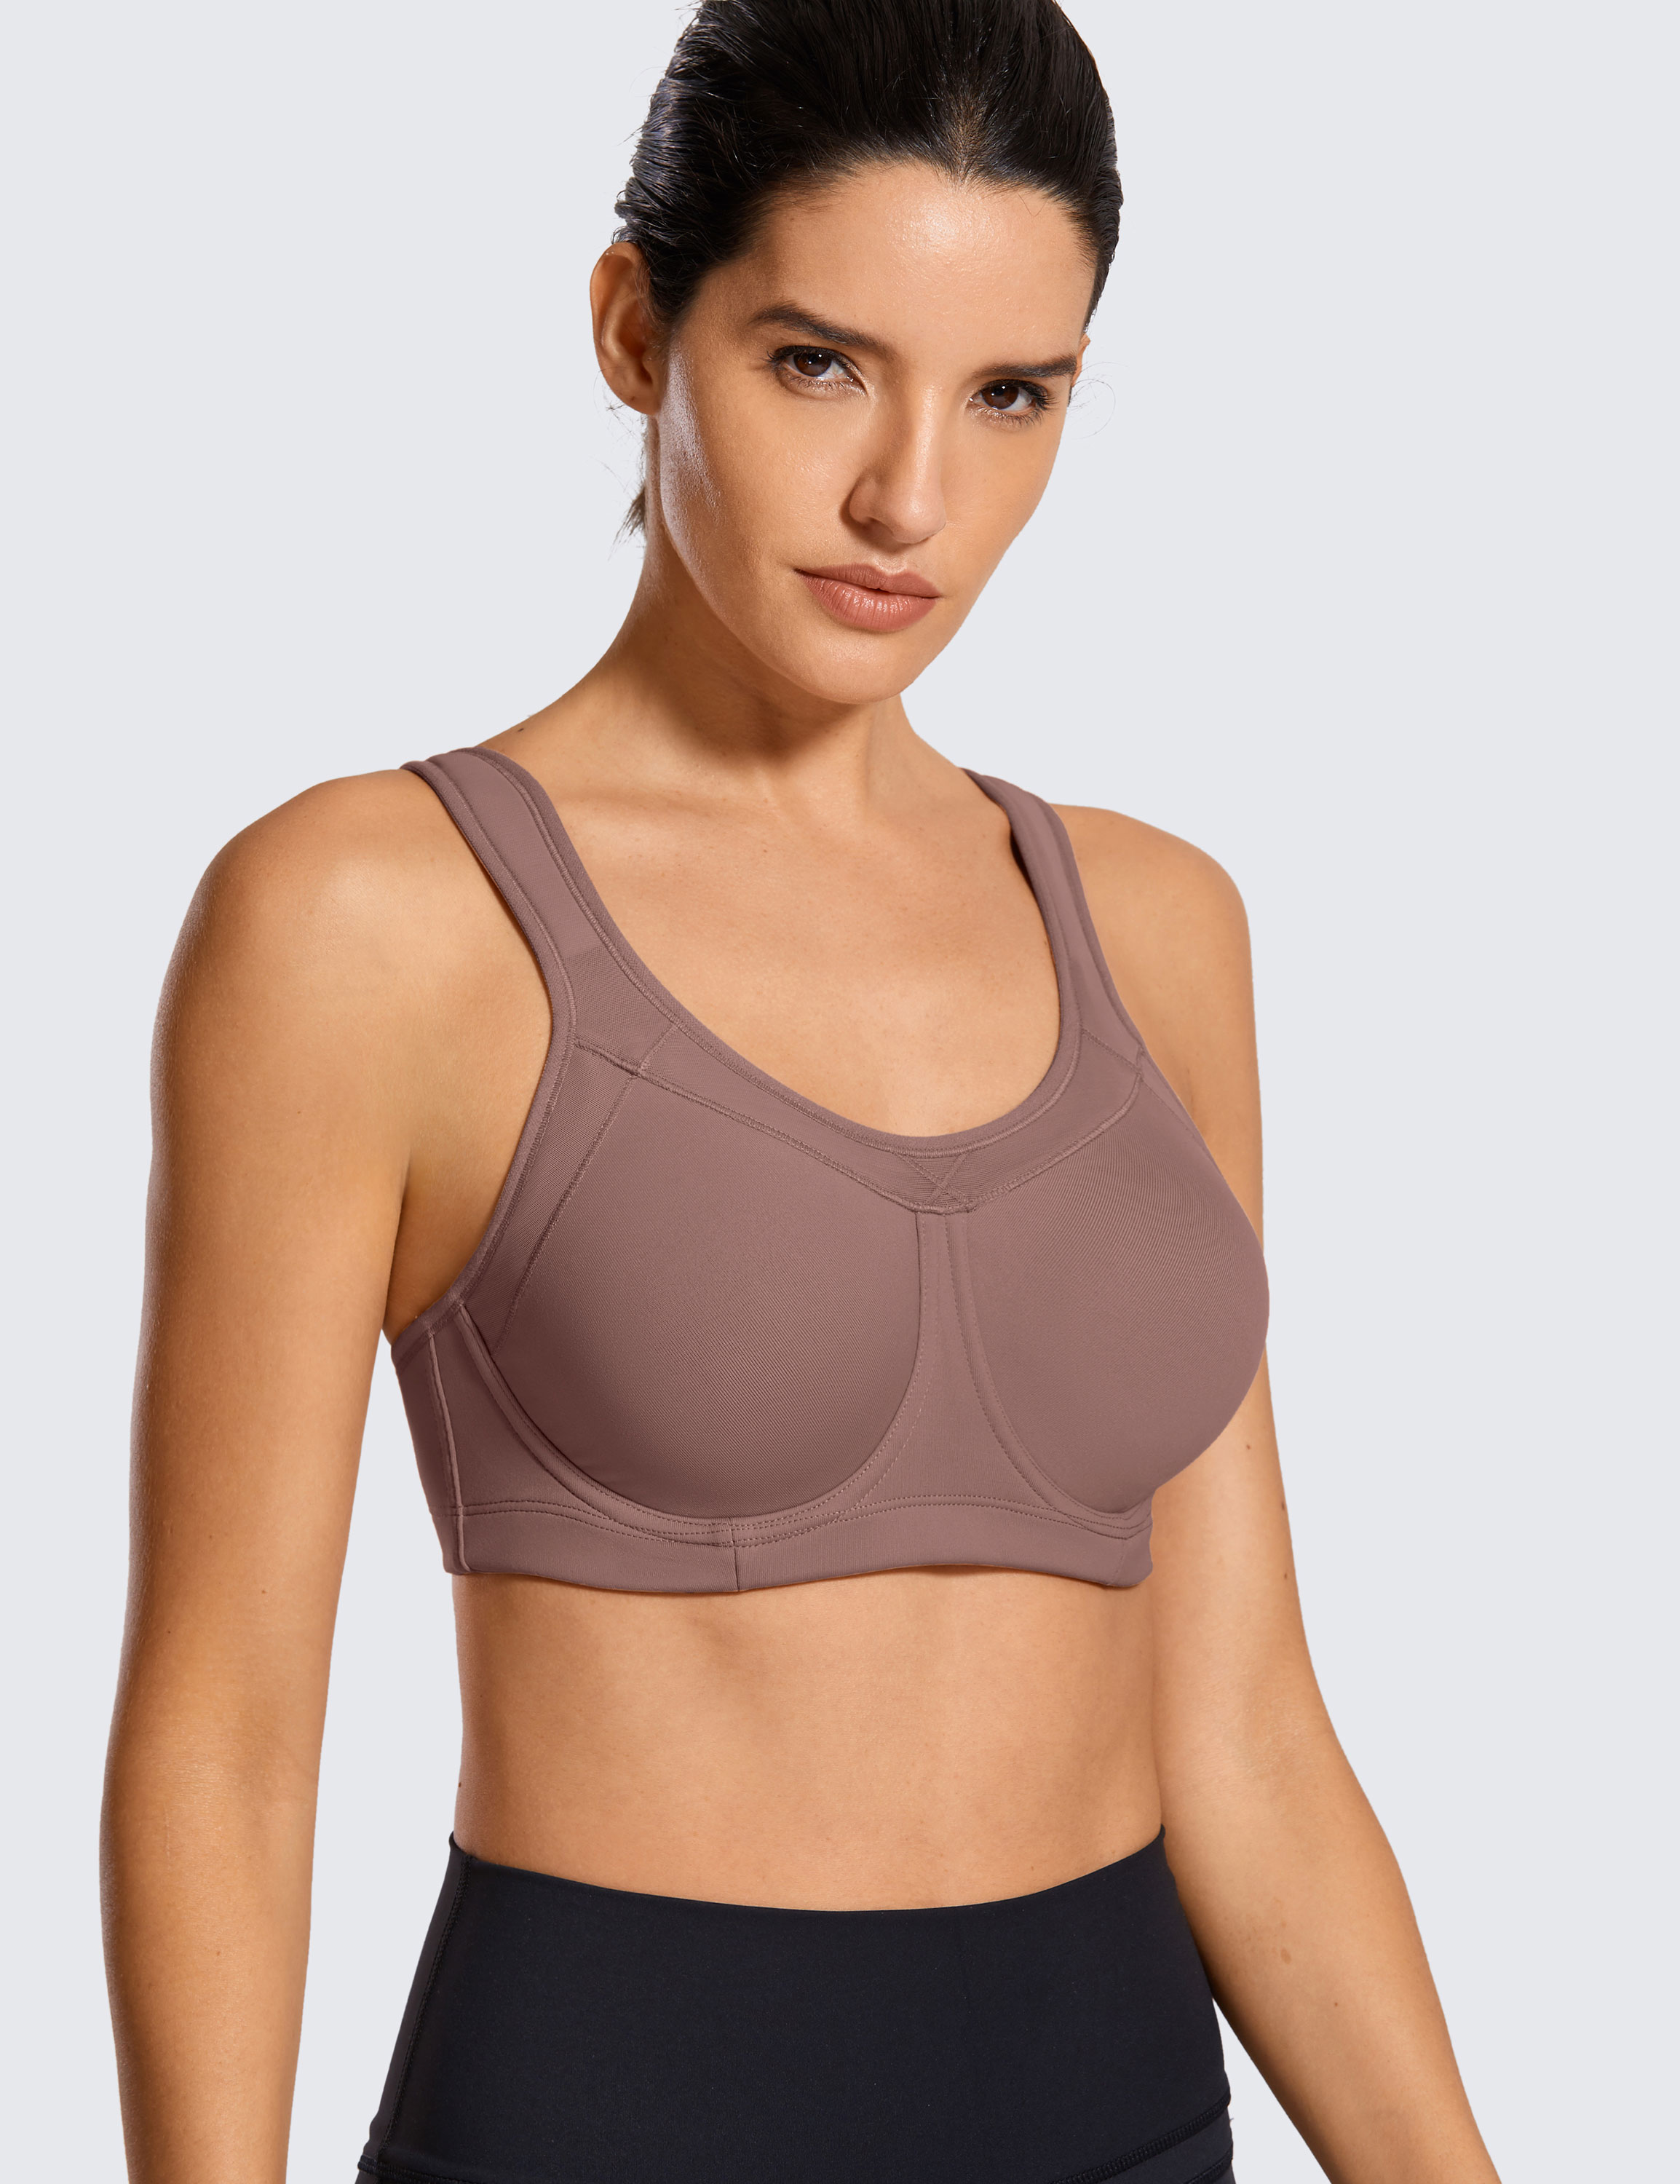 SYROKAN Women's High Impact Front Closure Racerback Full Support Wirefree  Sports Bra Spiced Apple Brown 36C price in UAE,  UAE